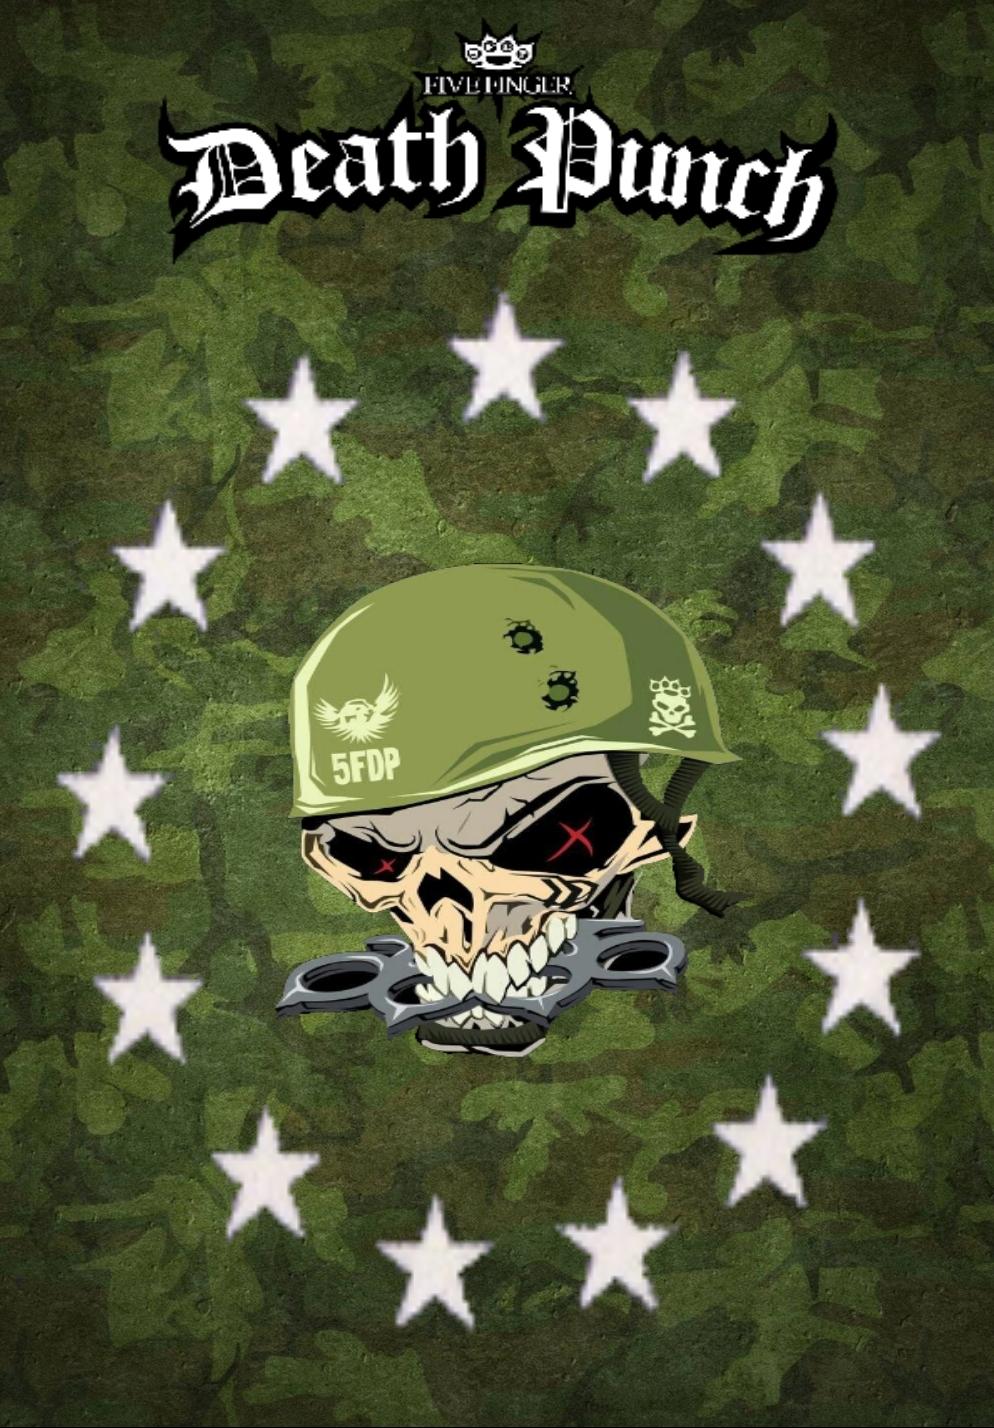 Here's a military Knucklehead wallpaper I made with some stock